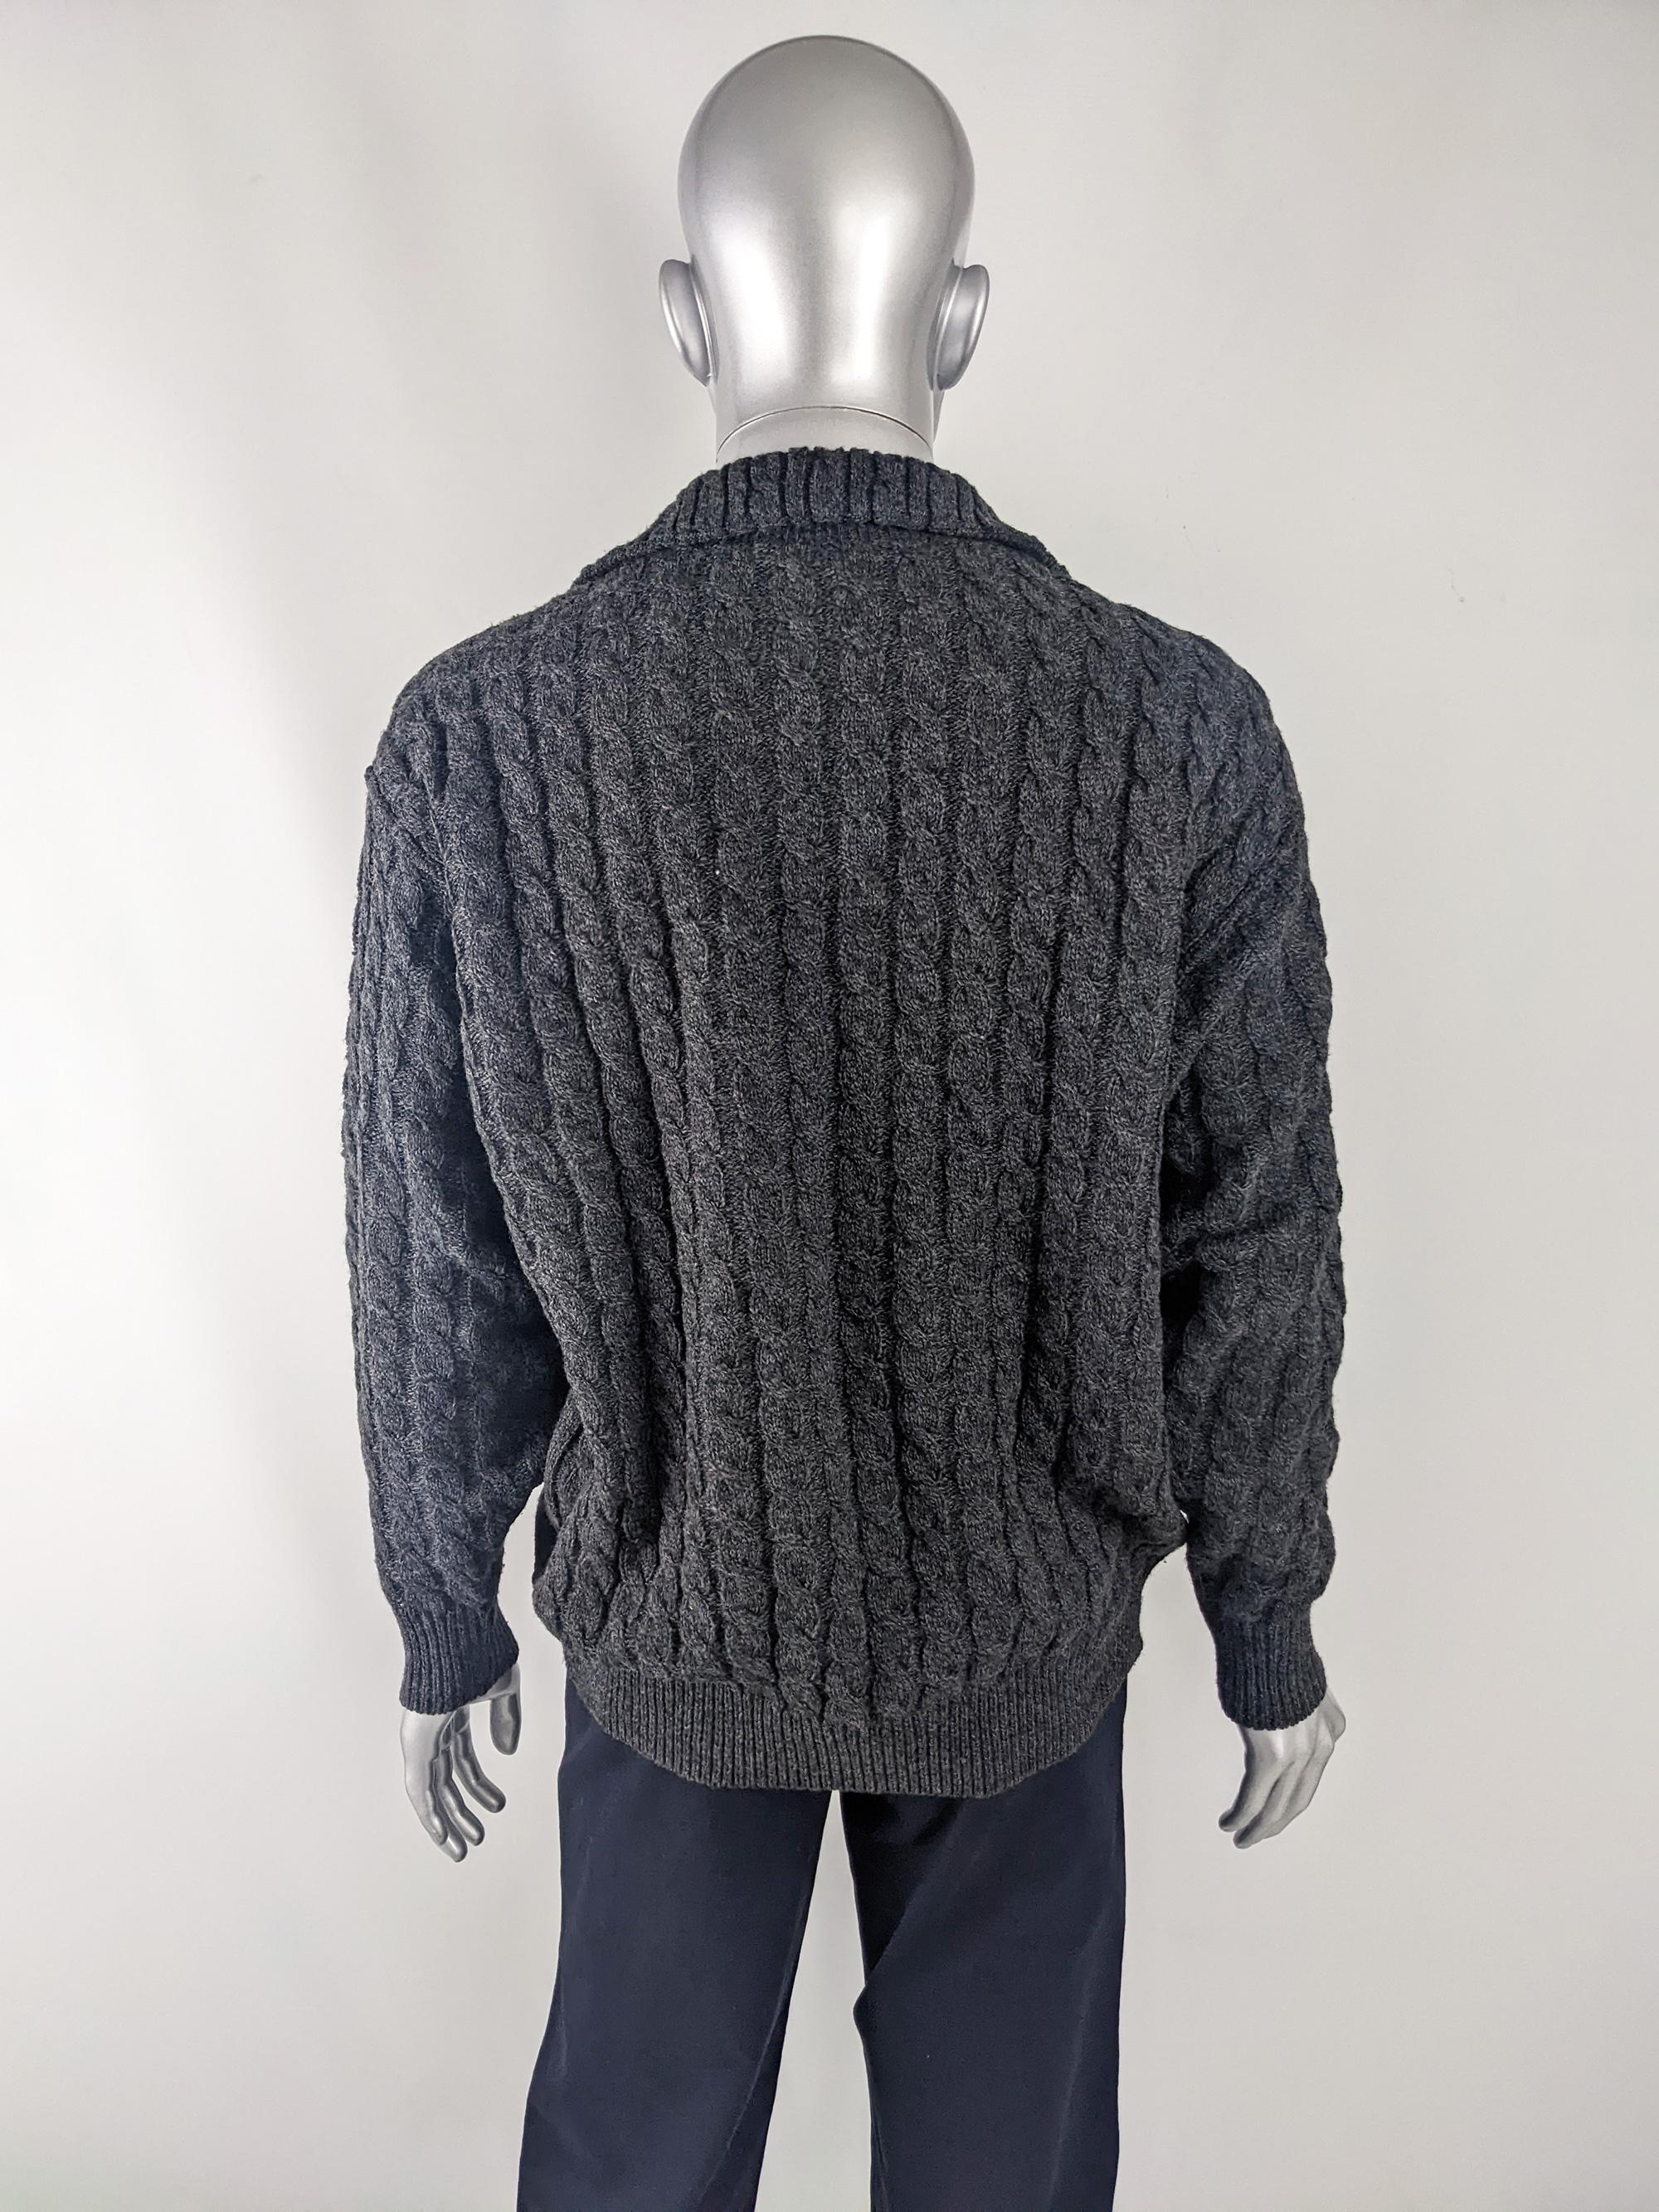 Men's Carlo Colucci Mens Vintage Grey Cable Knit Suede Patch Sweater, 1980s